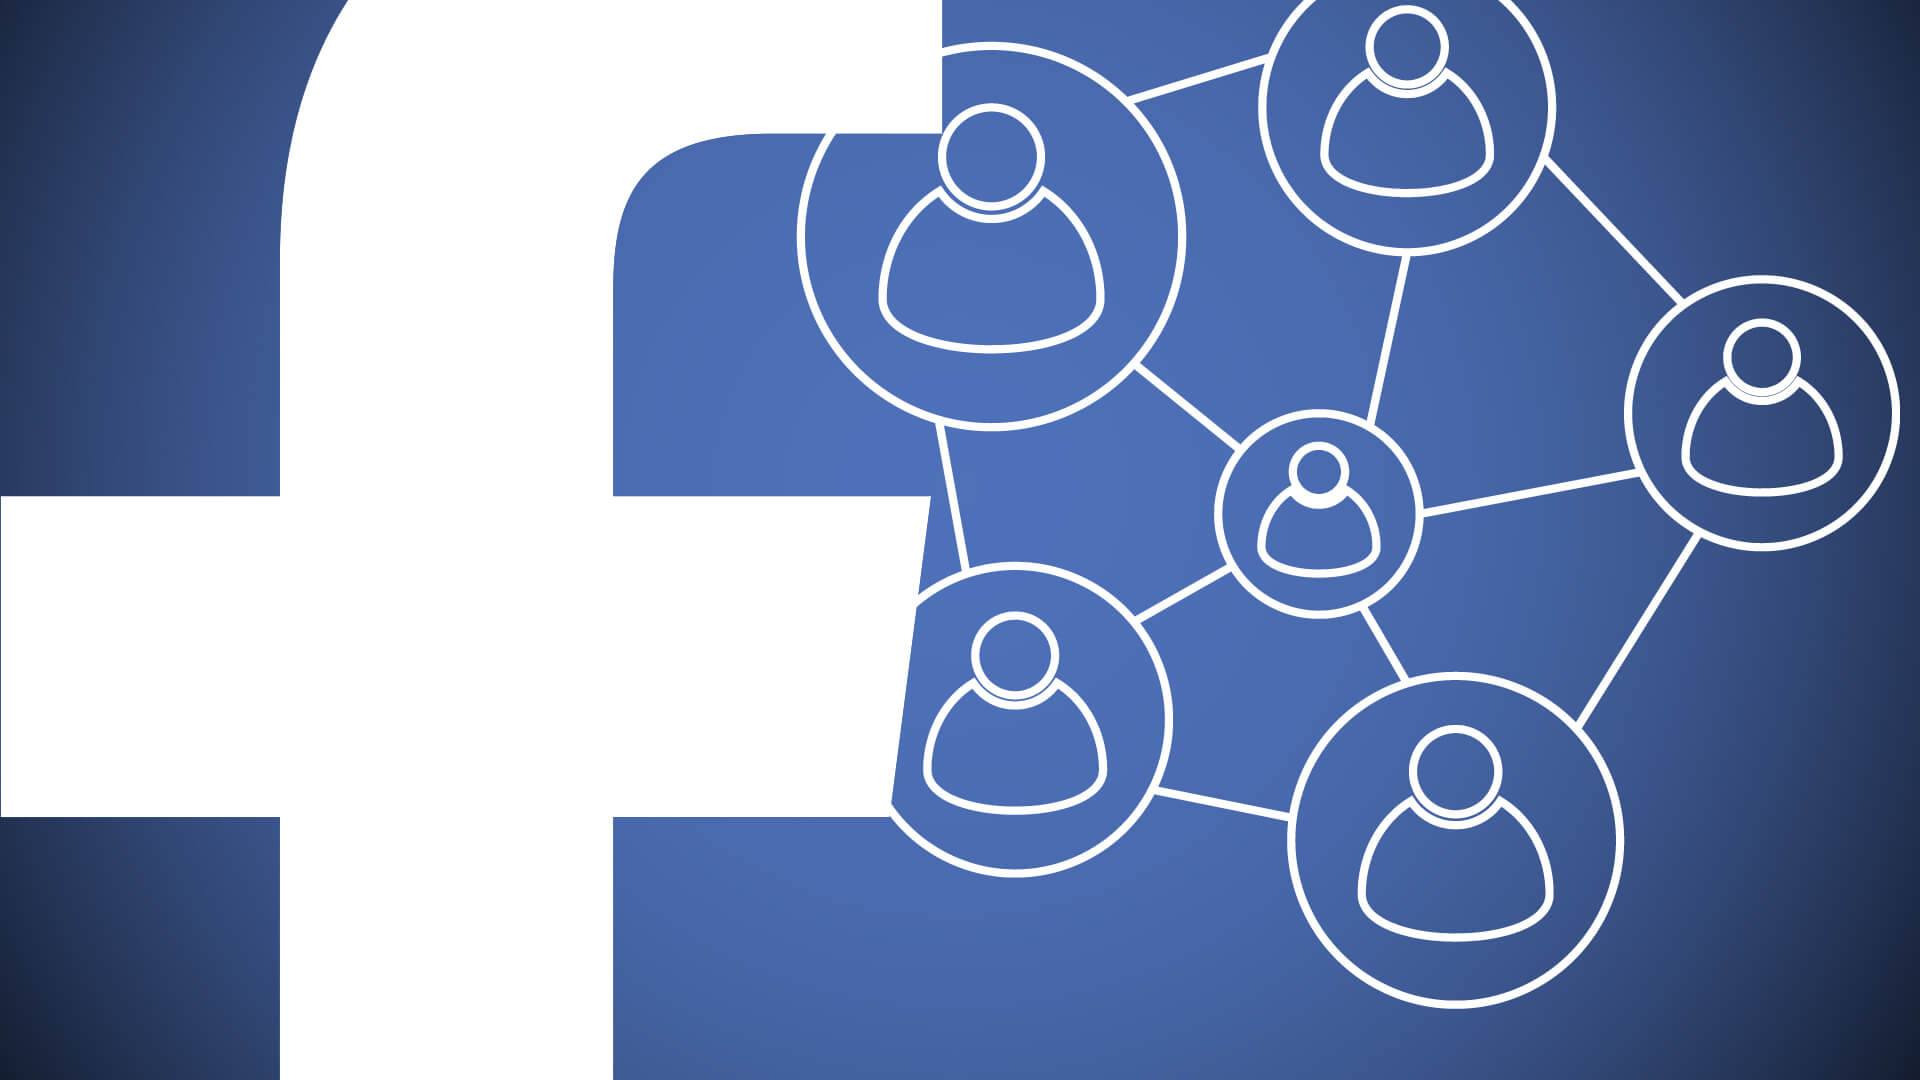 Why Facebook Marketing Worth it - Cactus Media Group - Facebook Audience